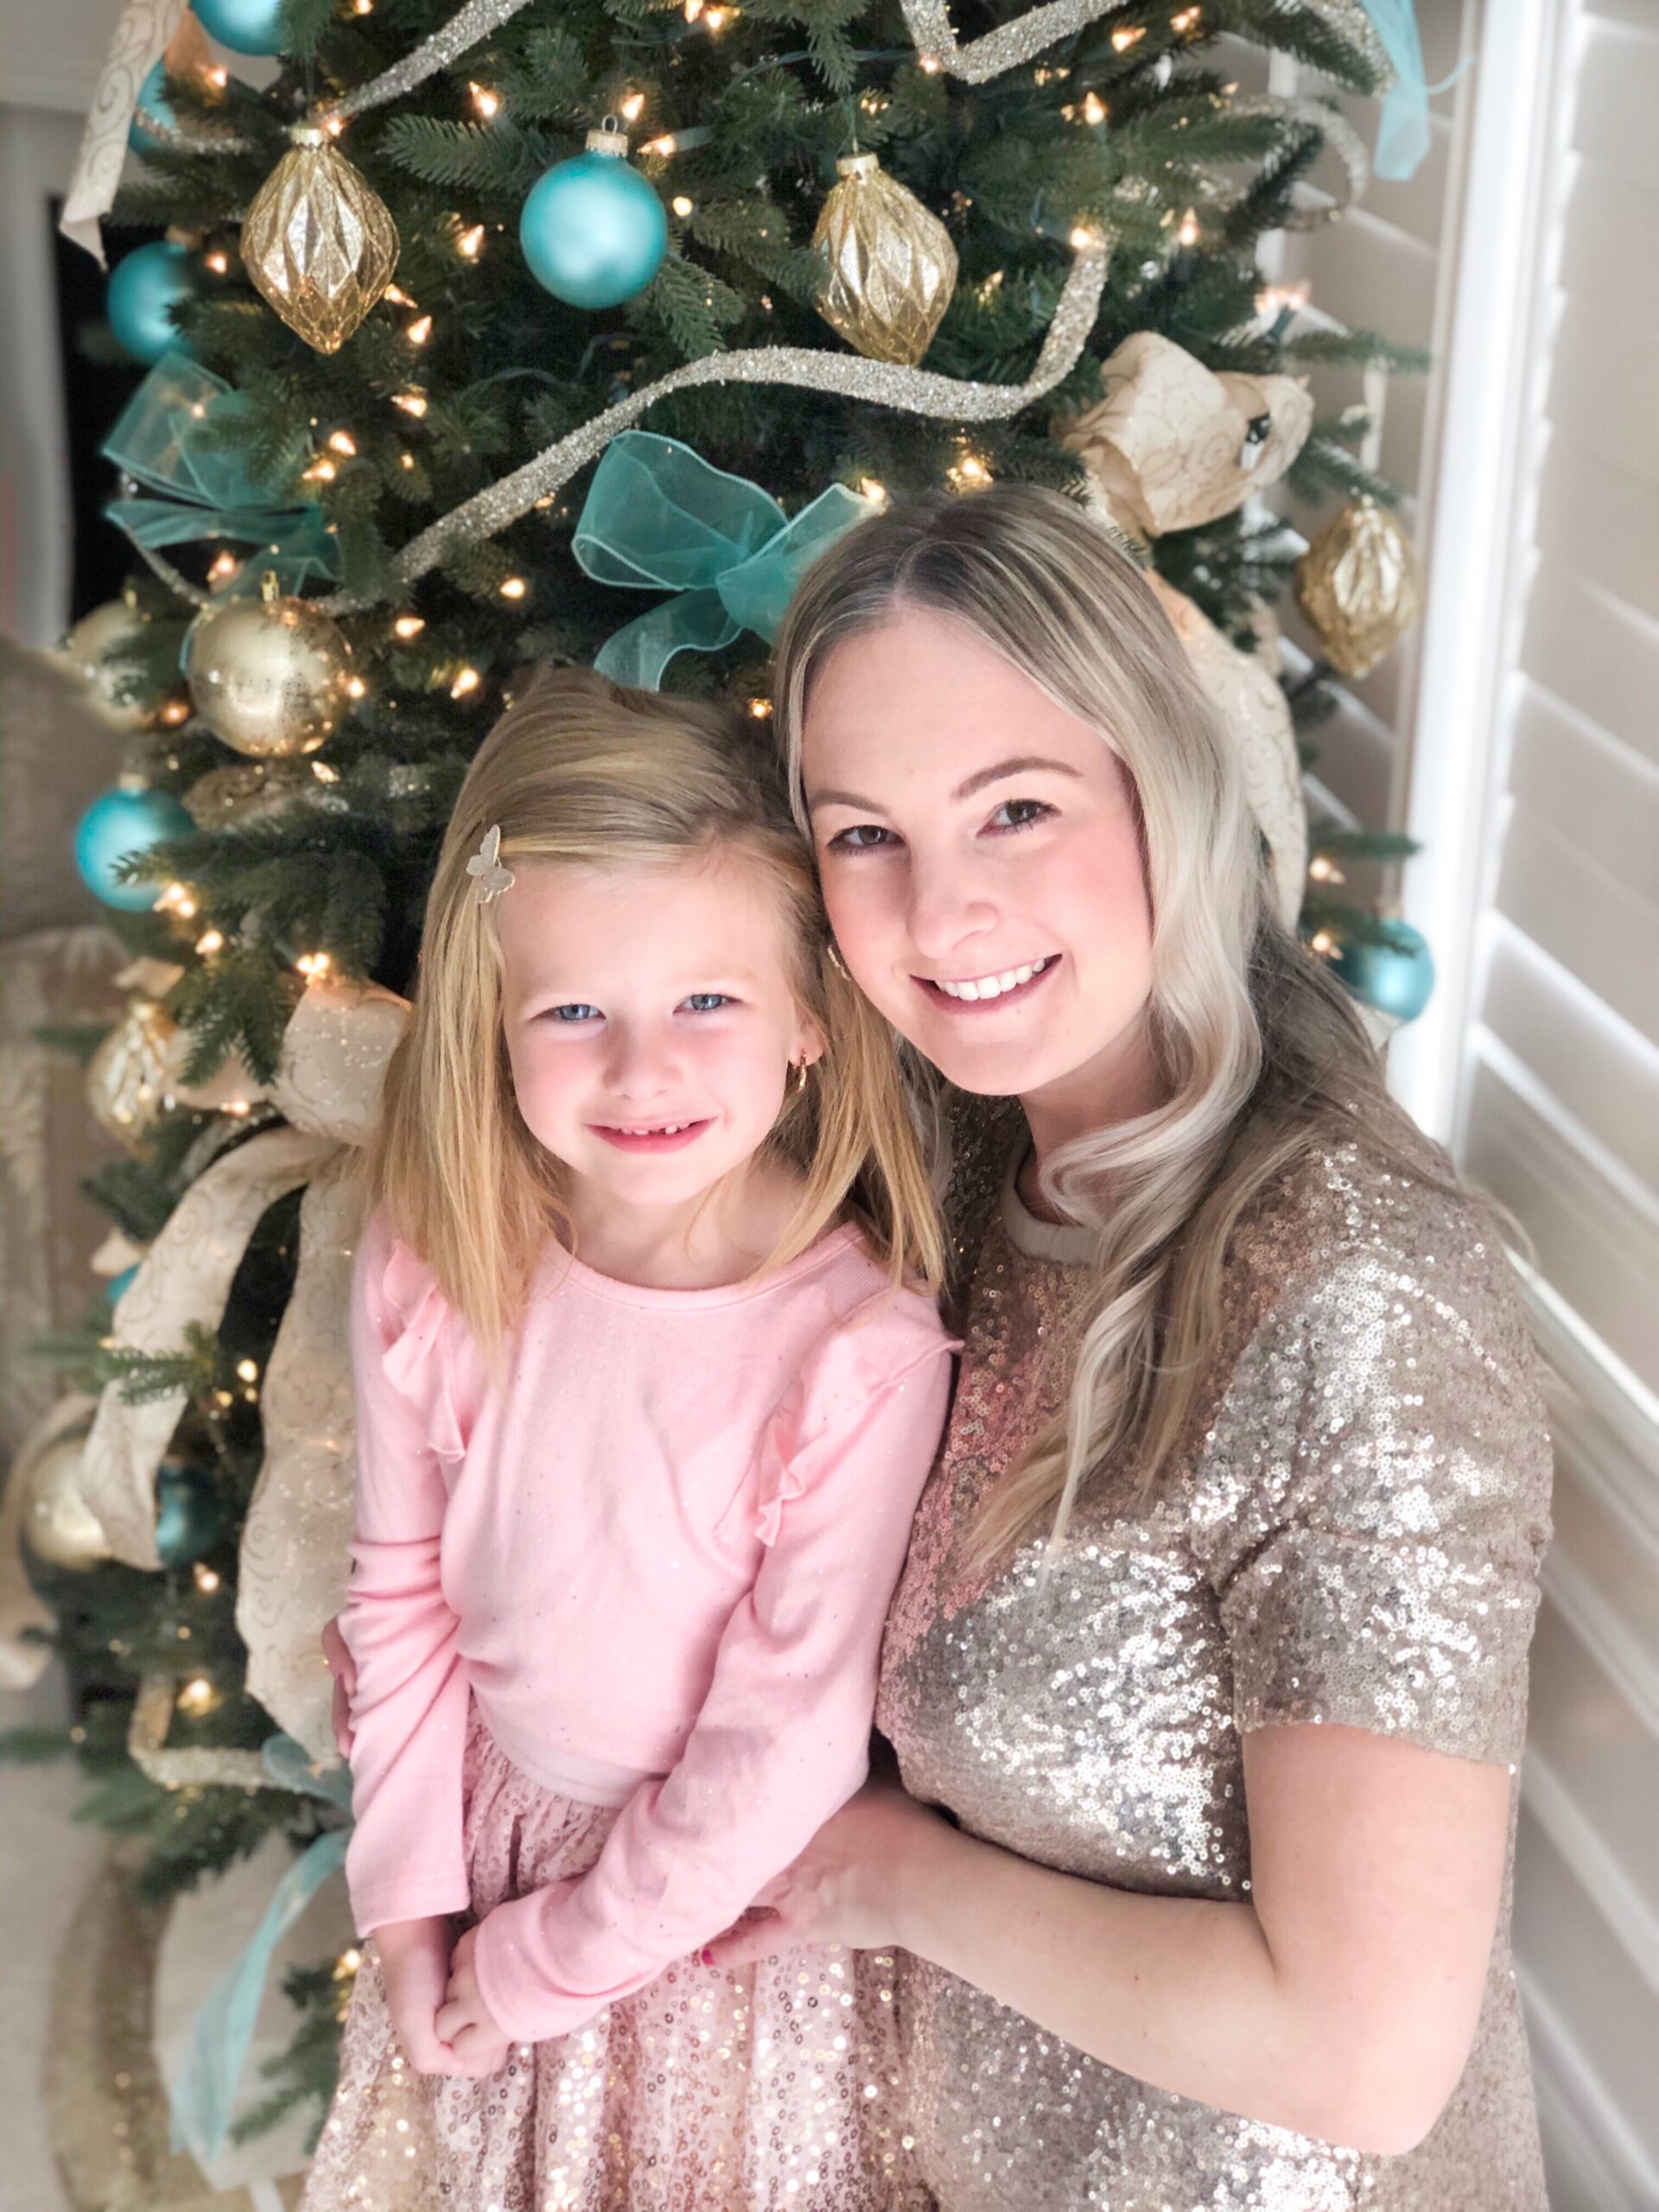 Mother and Daughter holiday looks from Joe Fresh on Livin' Life with Style